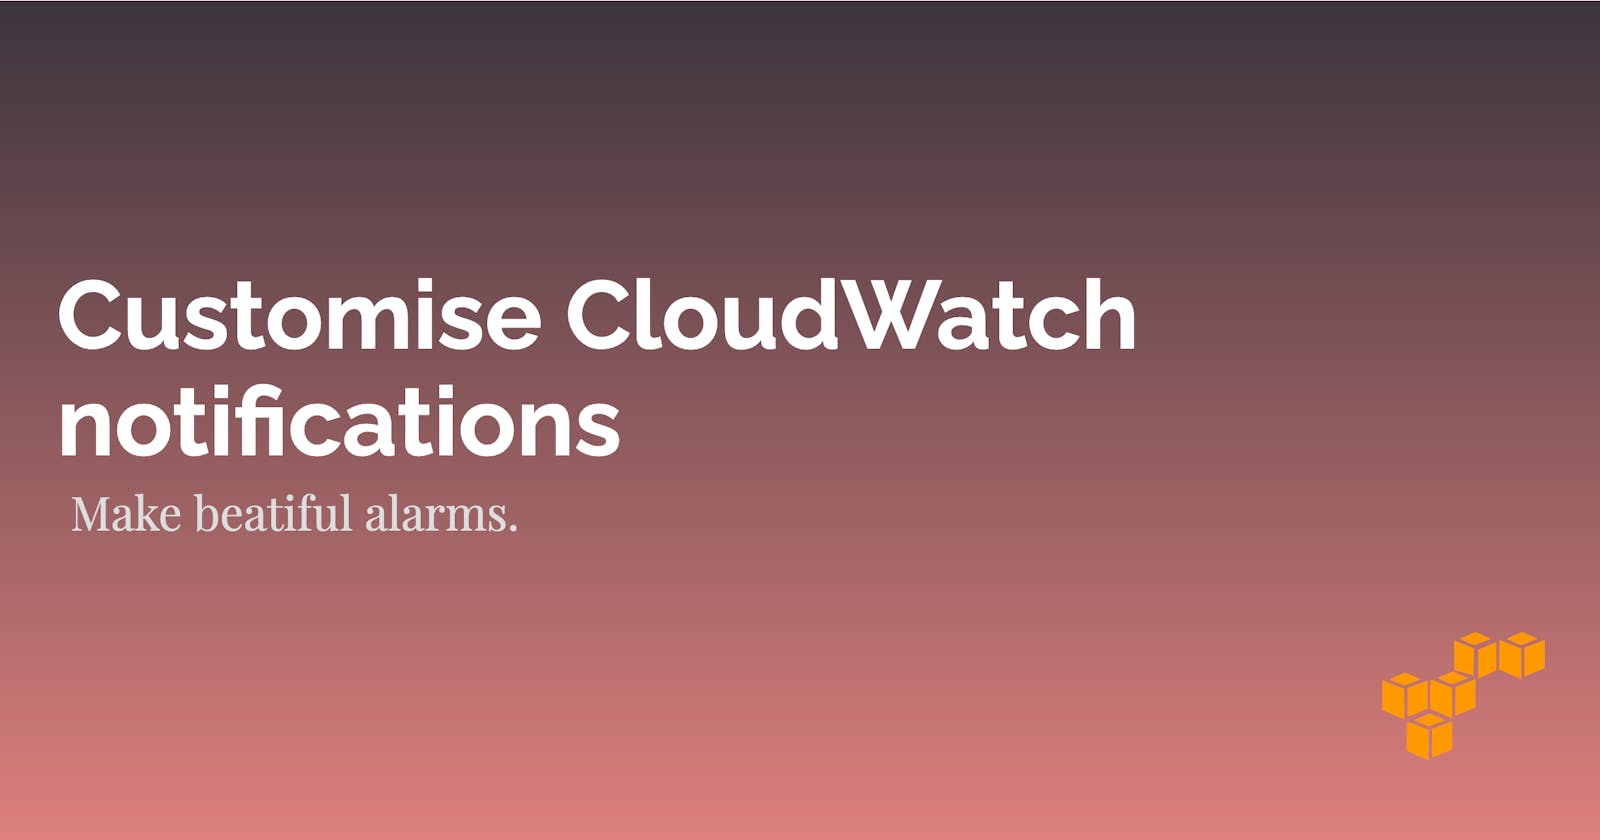 Customise CloudWatch alarms with Lambda, SES, HTML, and CDK.